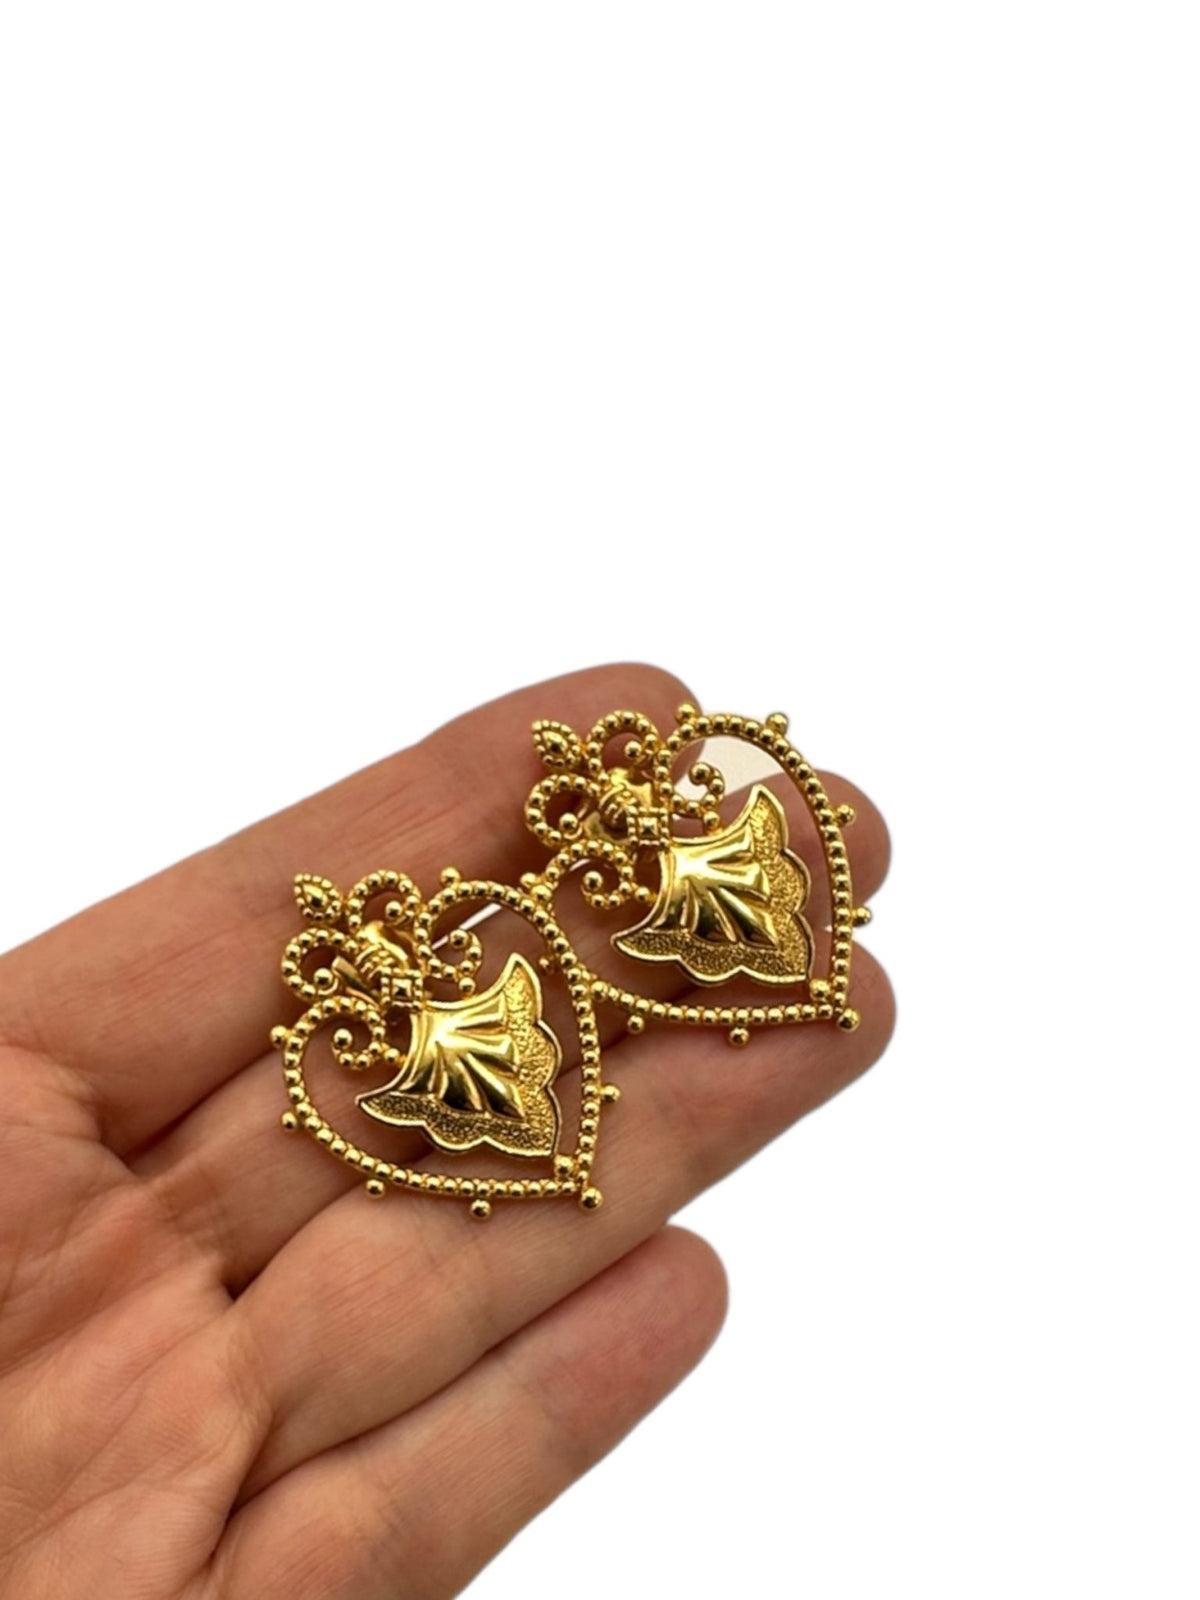 Gold Victorian Revival Heart Vintage Pierced Earrings - 24 Wishes Vintage Jewelry